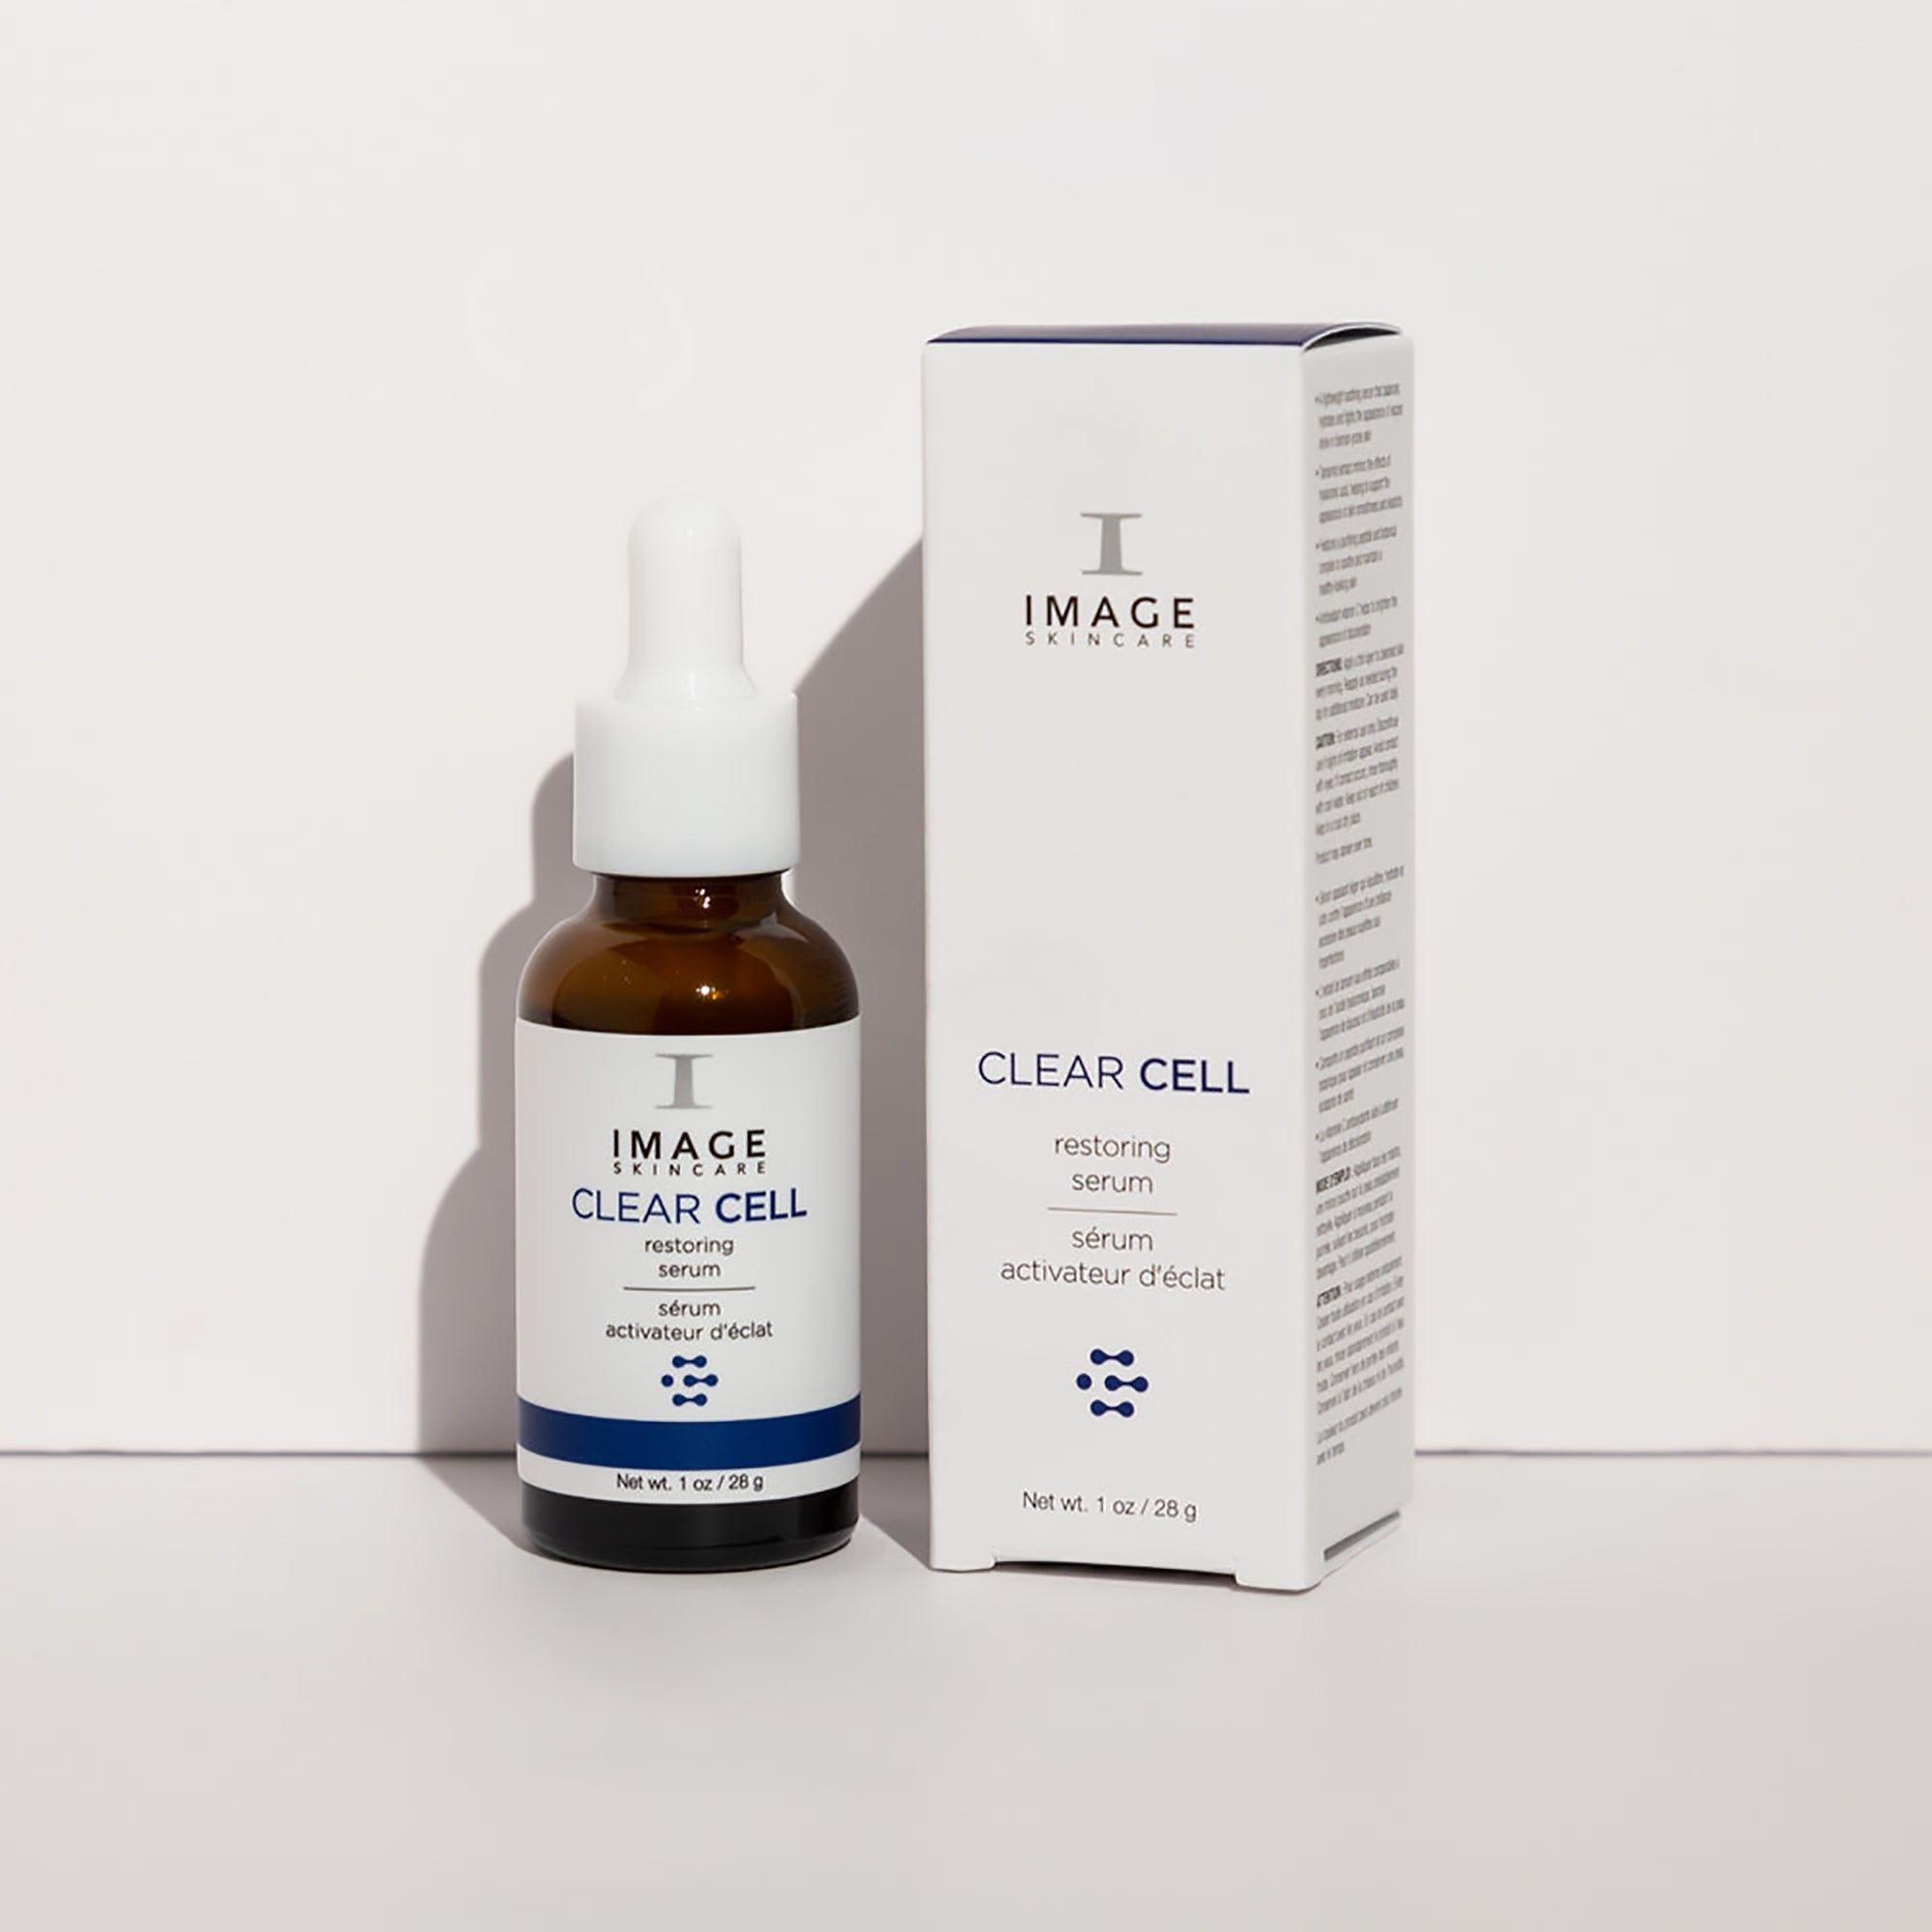 Image Skincare Clear Cell Restoring Serum / 1OZ